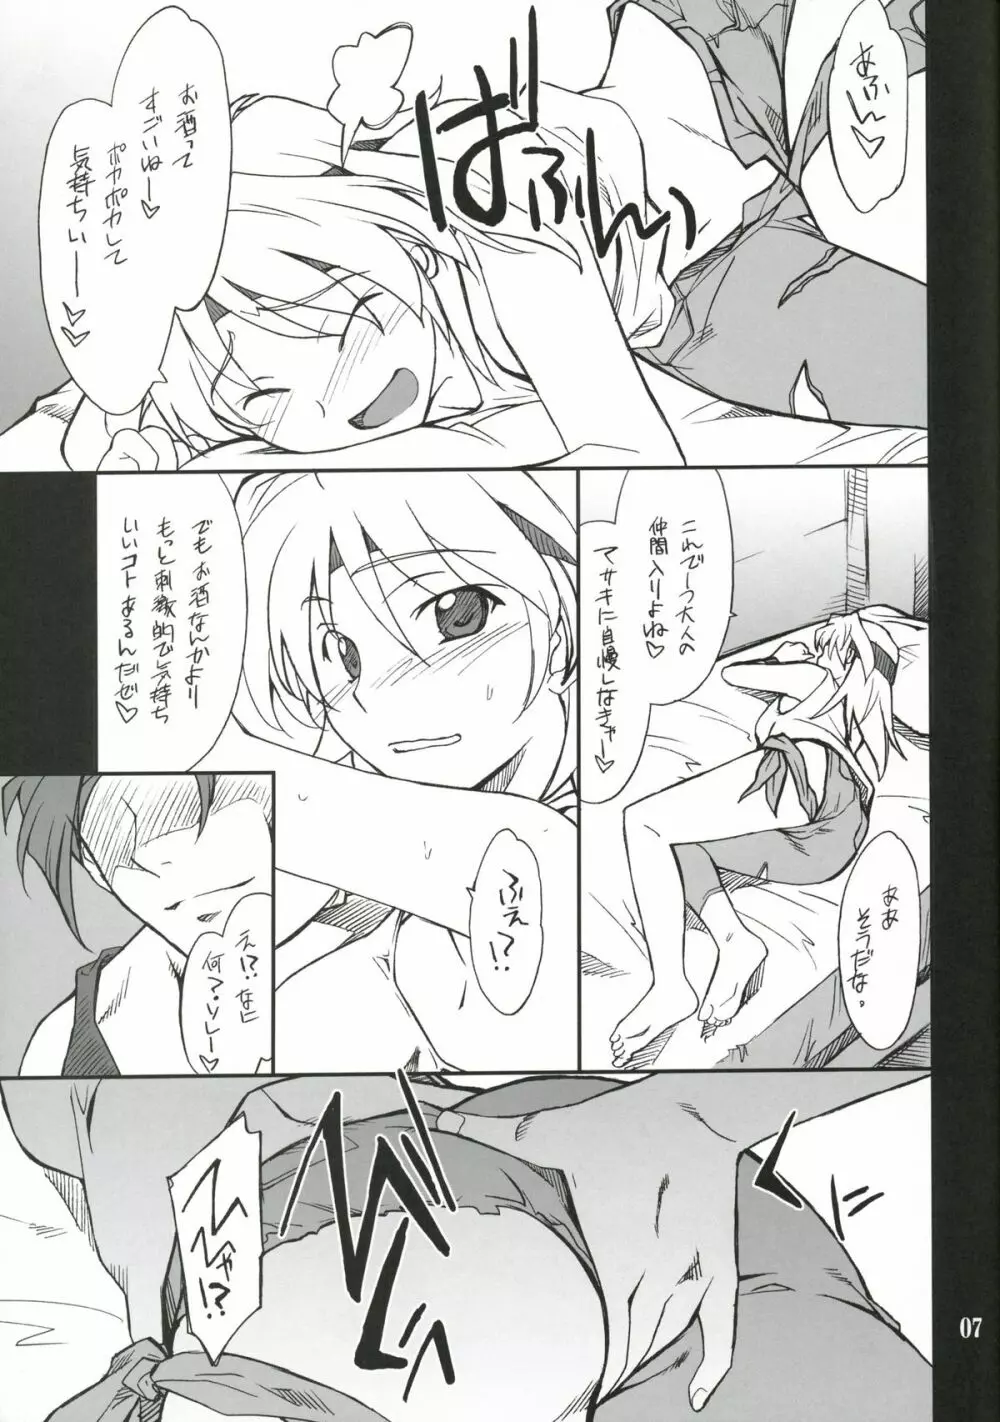 INTERMISSION_if code_07:RYUNE - page6